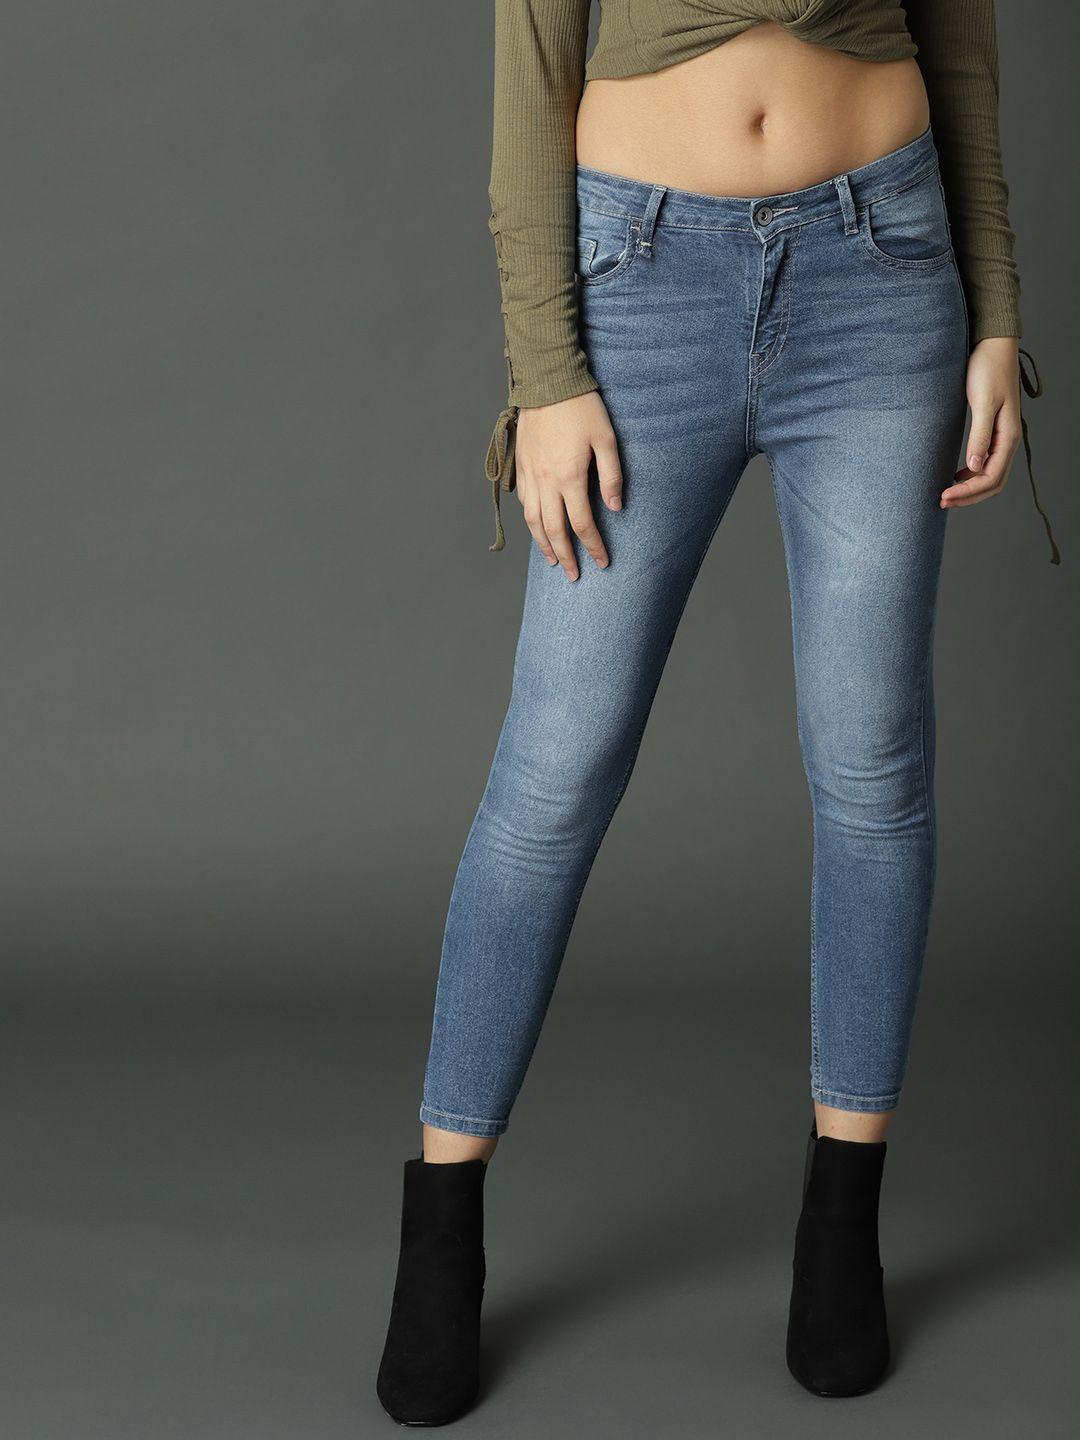 roadster-women-blue-skinny-fit-high-rise-clean-look-stretchable-cropped-jeans